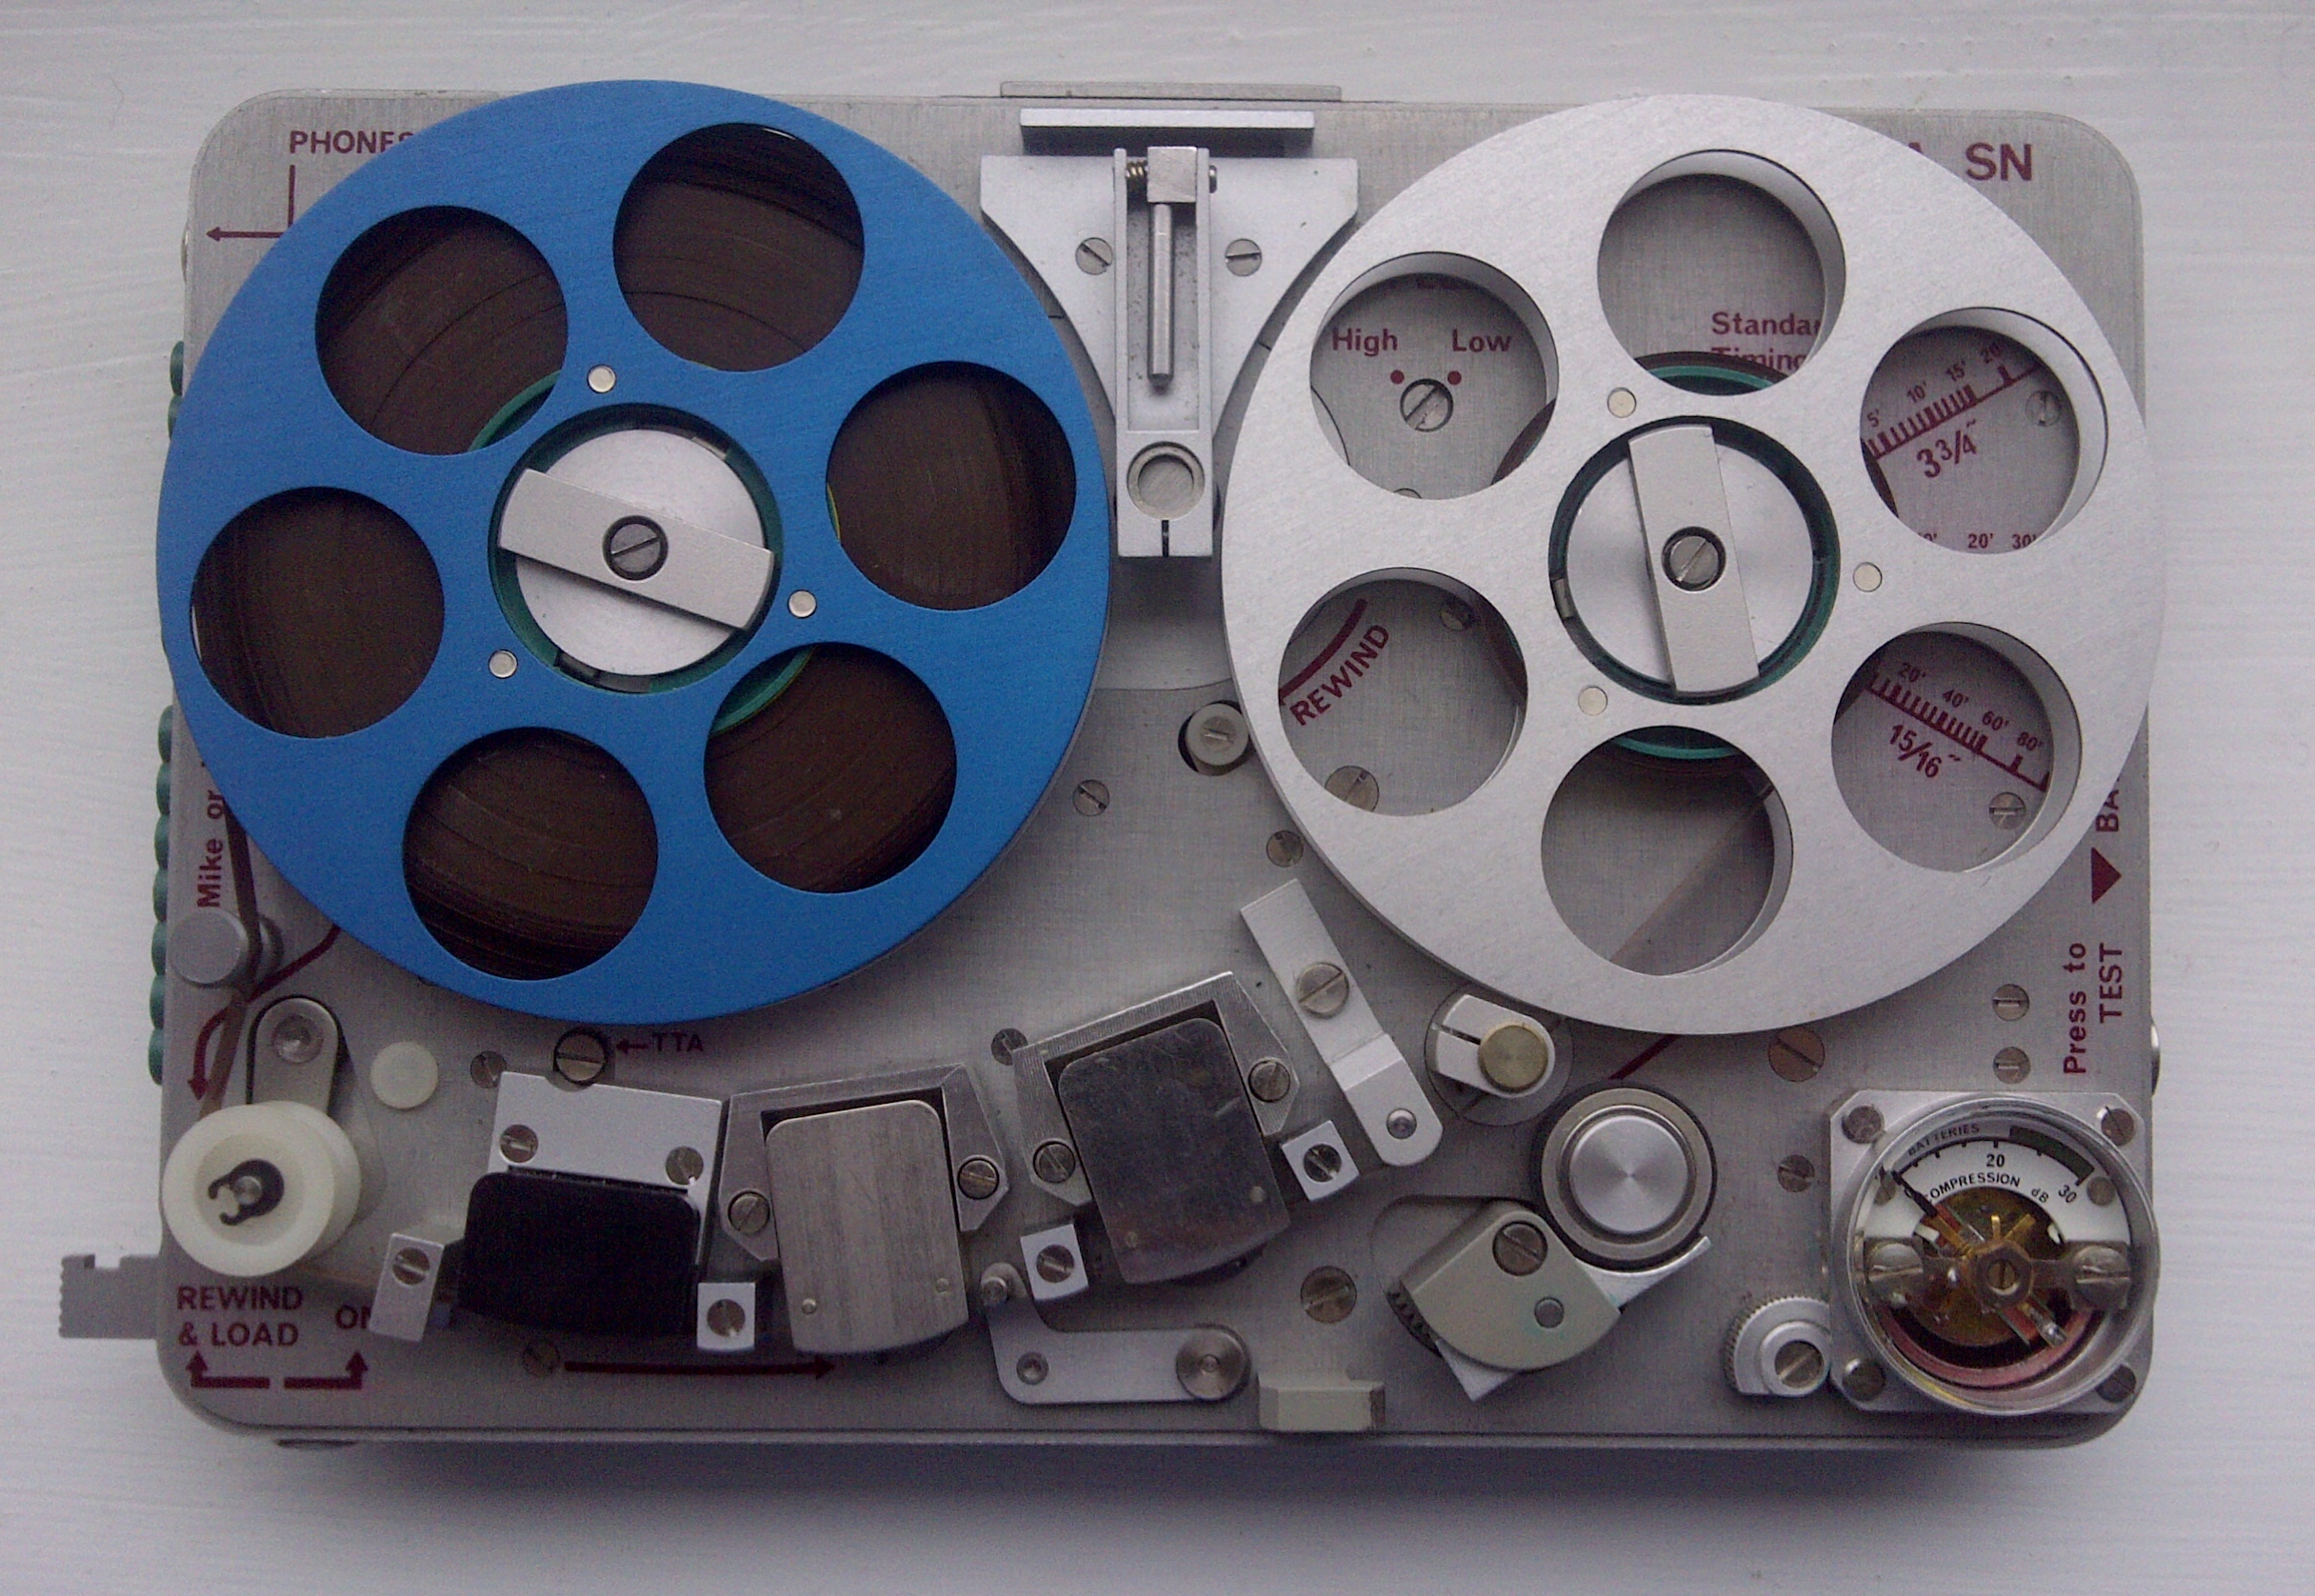 My treasured Nagra SN (Serie Noire) magnetic tape recorder. As featured in 'All The President's Men.'